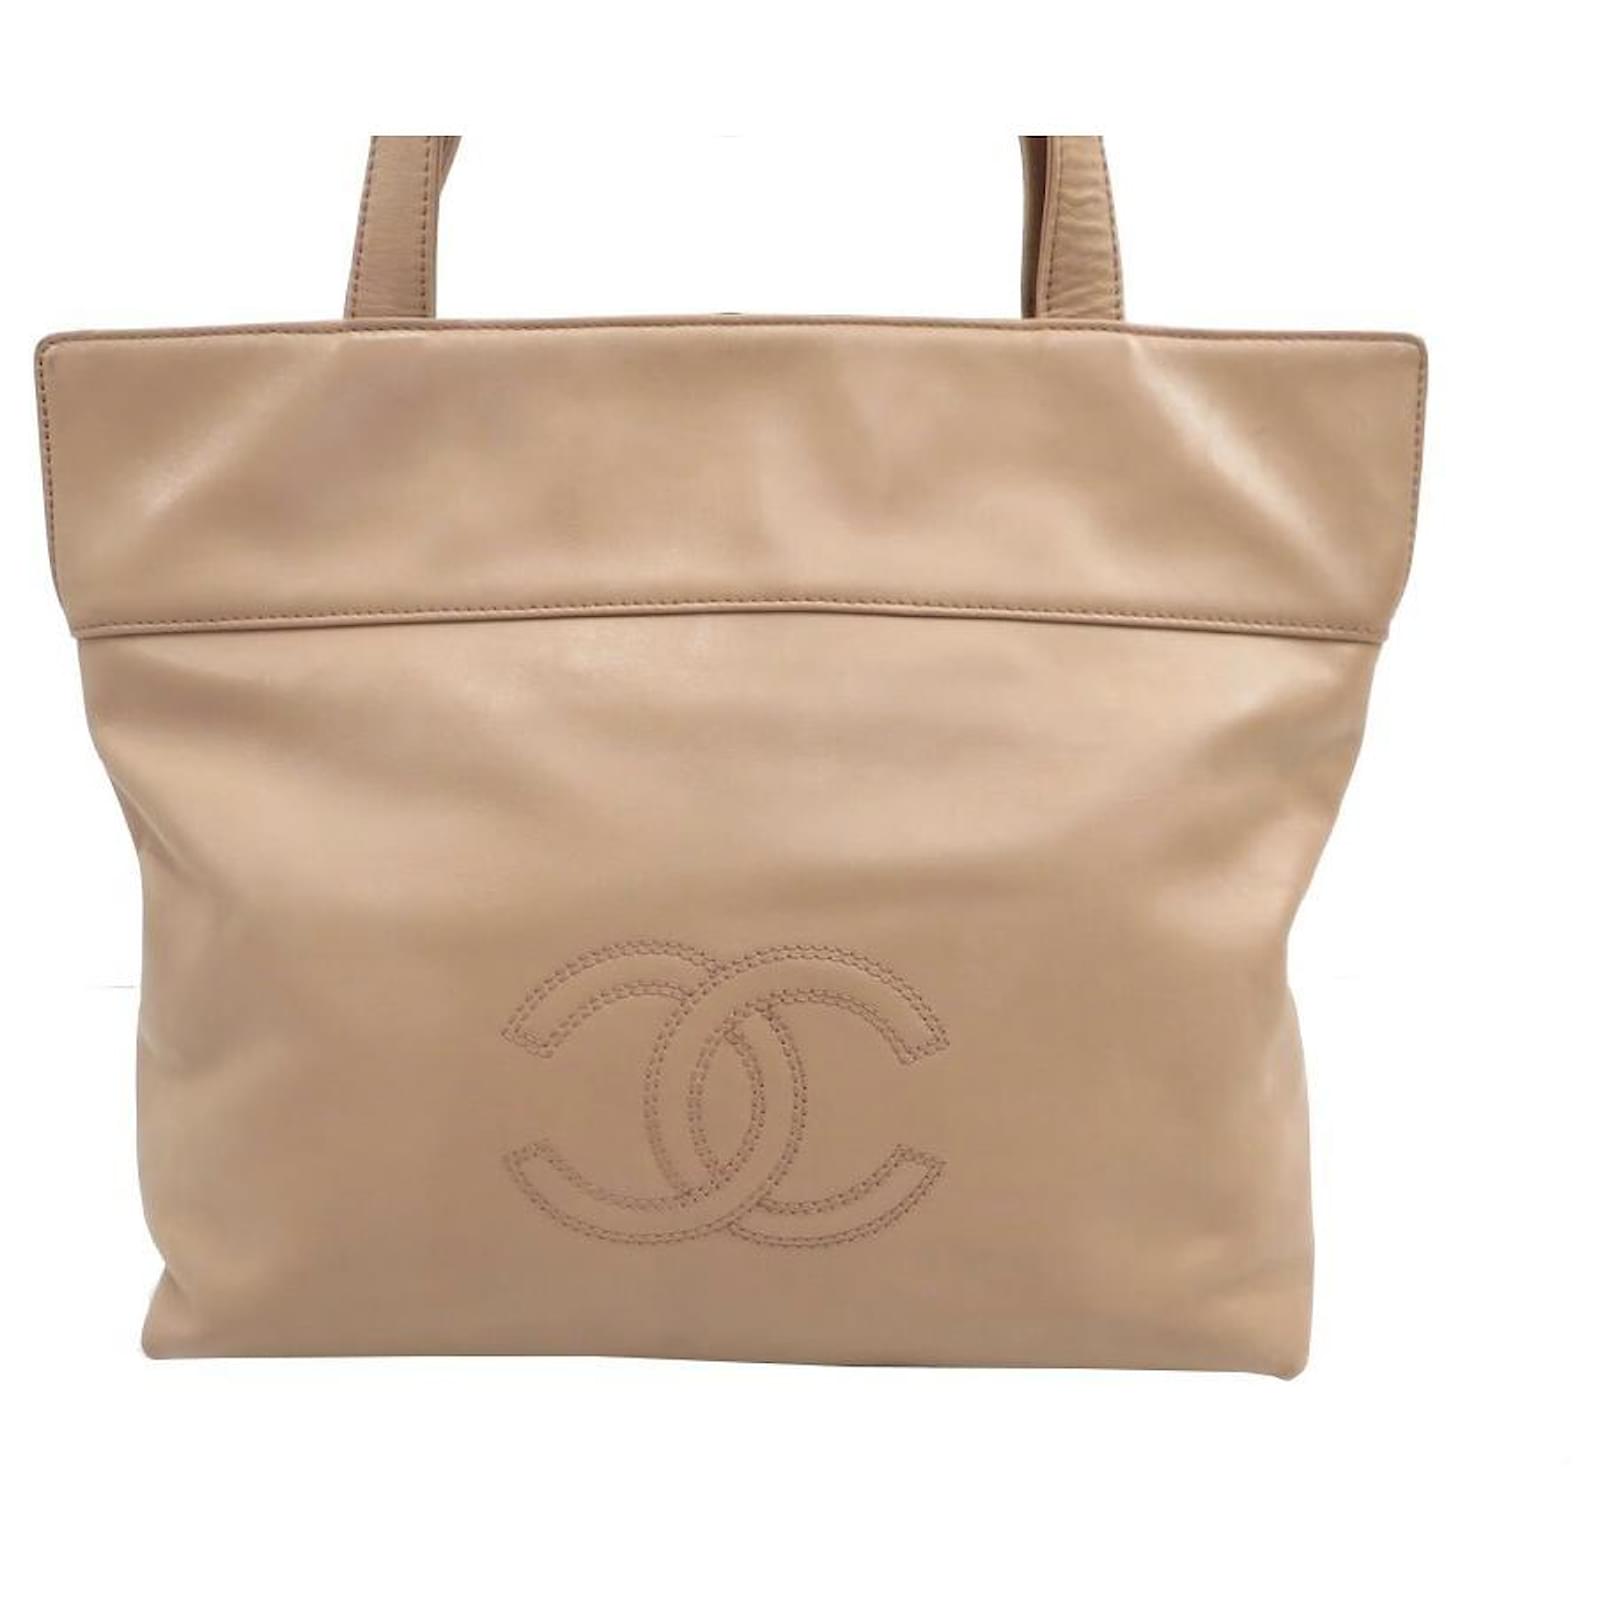 CHANEL CABAS SHOPPING LOGO CC BEIGE LEATHER HAND BAG TOTE PURSE